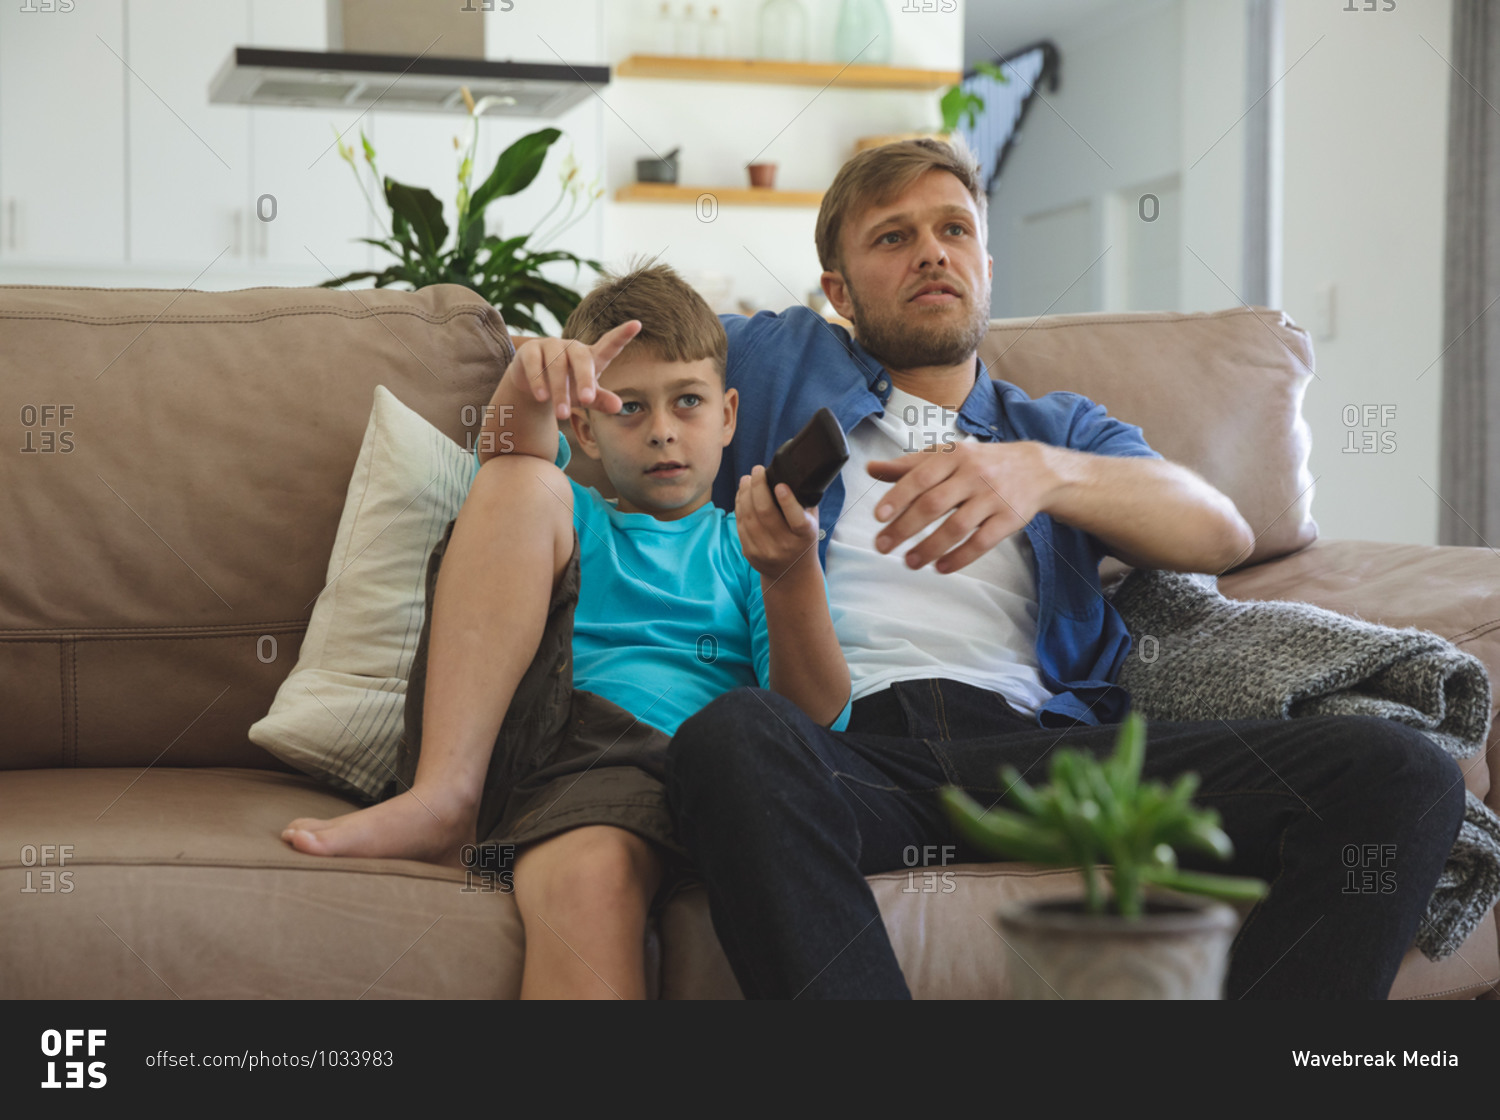 Caucasian man at home with his son together, sitting on sofa in living room, watching TV. Social distancing during Covid 19 Coronavirus quarantine lockdown.